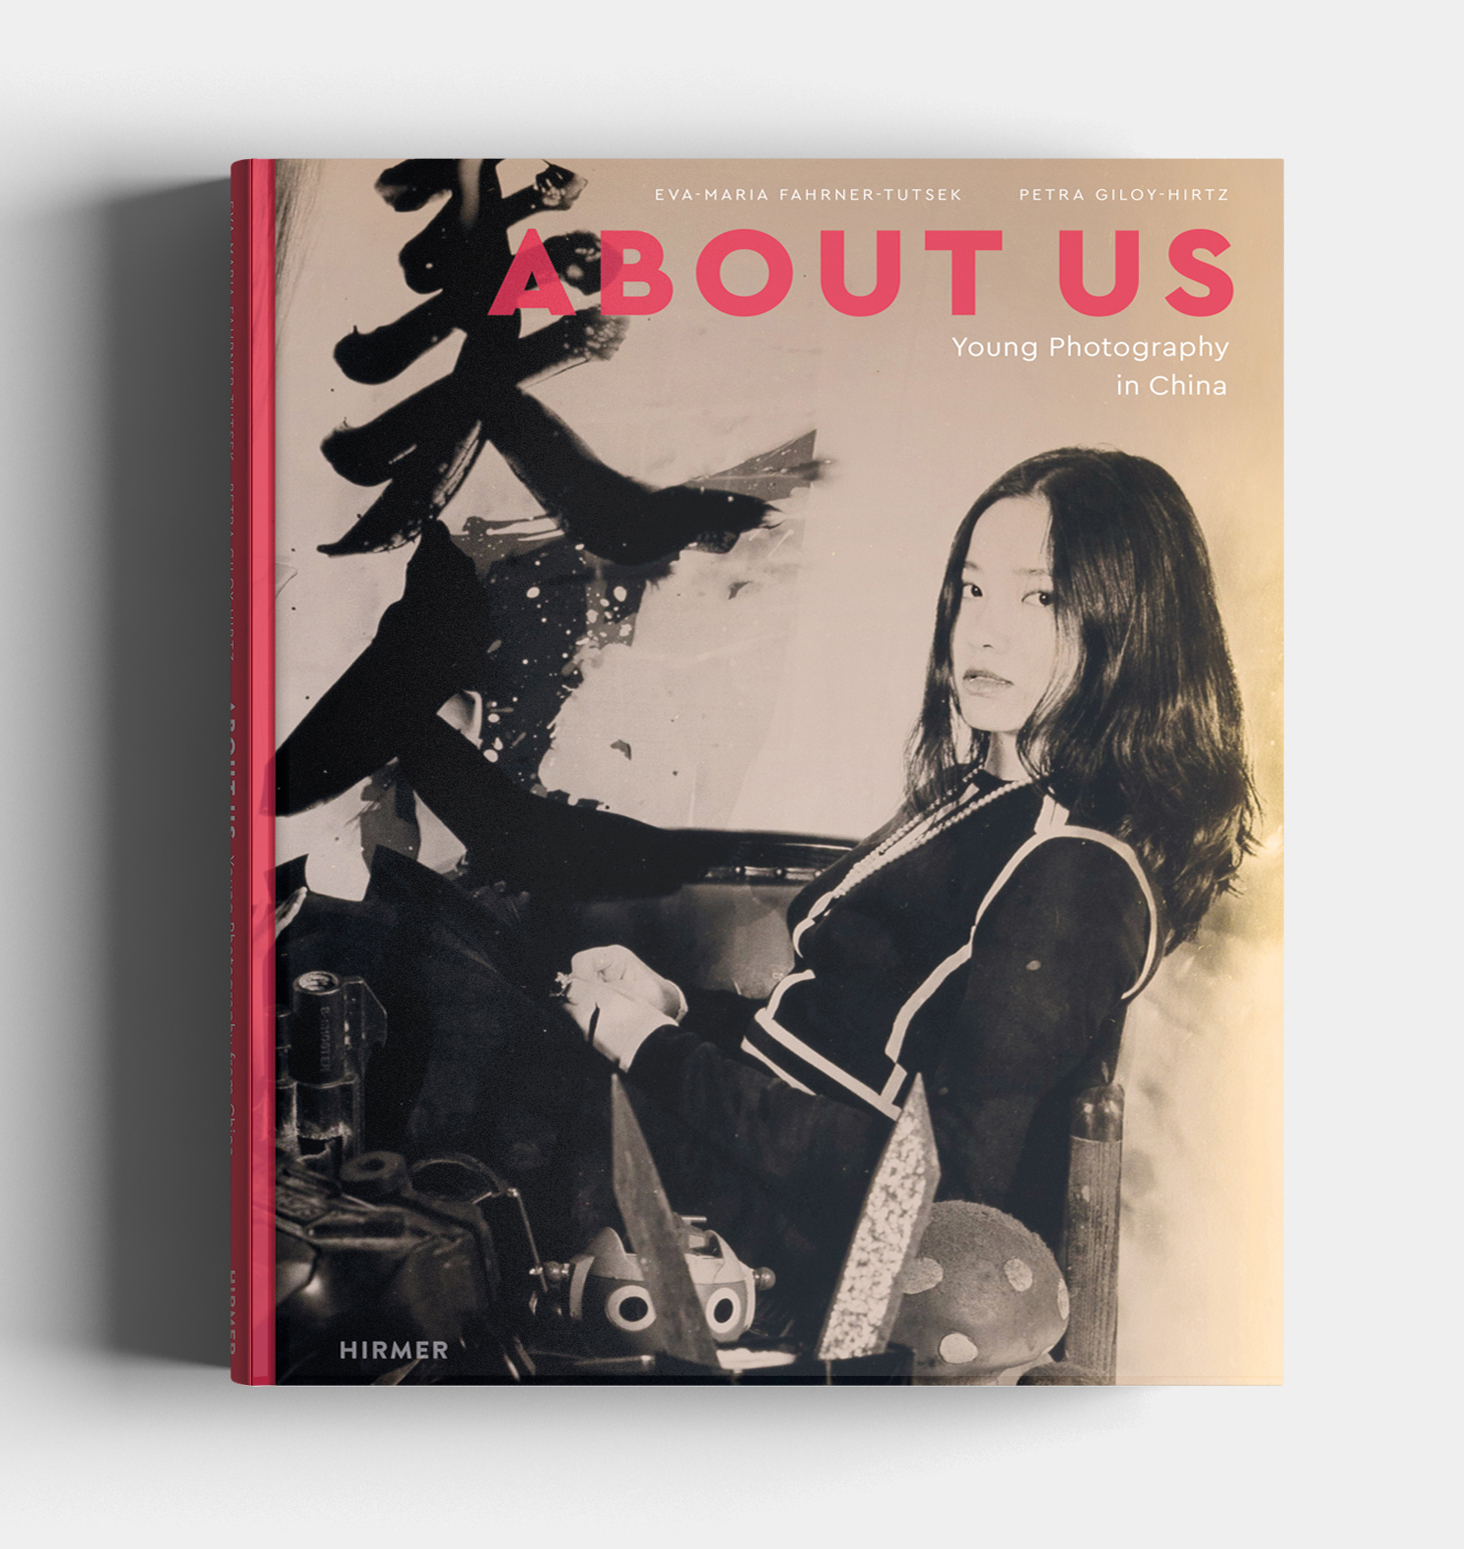 about-us-AboutUs_Titel_Schraegansicht.jpg - ABOUT US. Young Photography in China |  - ABOUT US. Young Photography in China